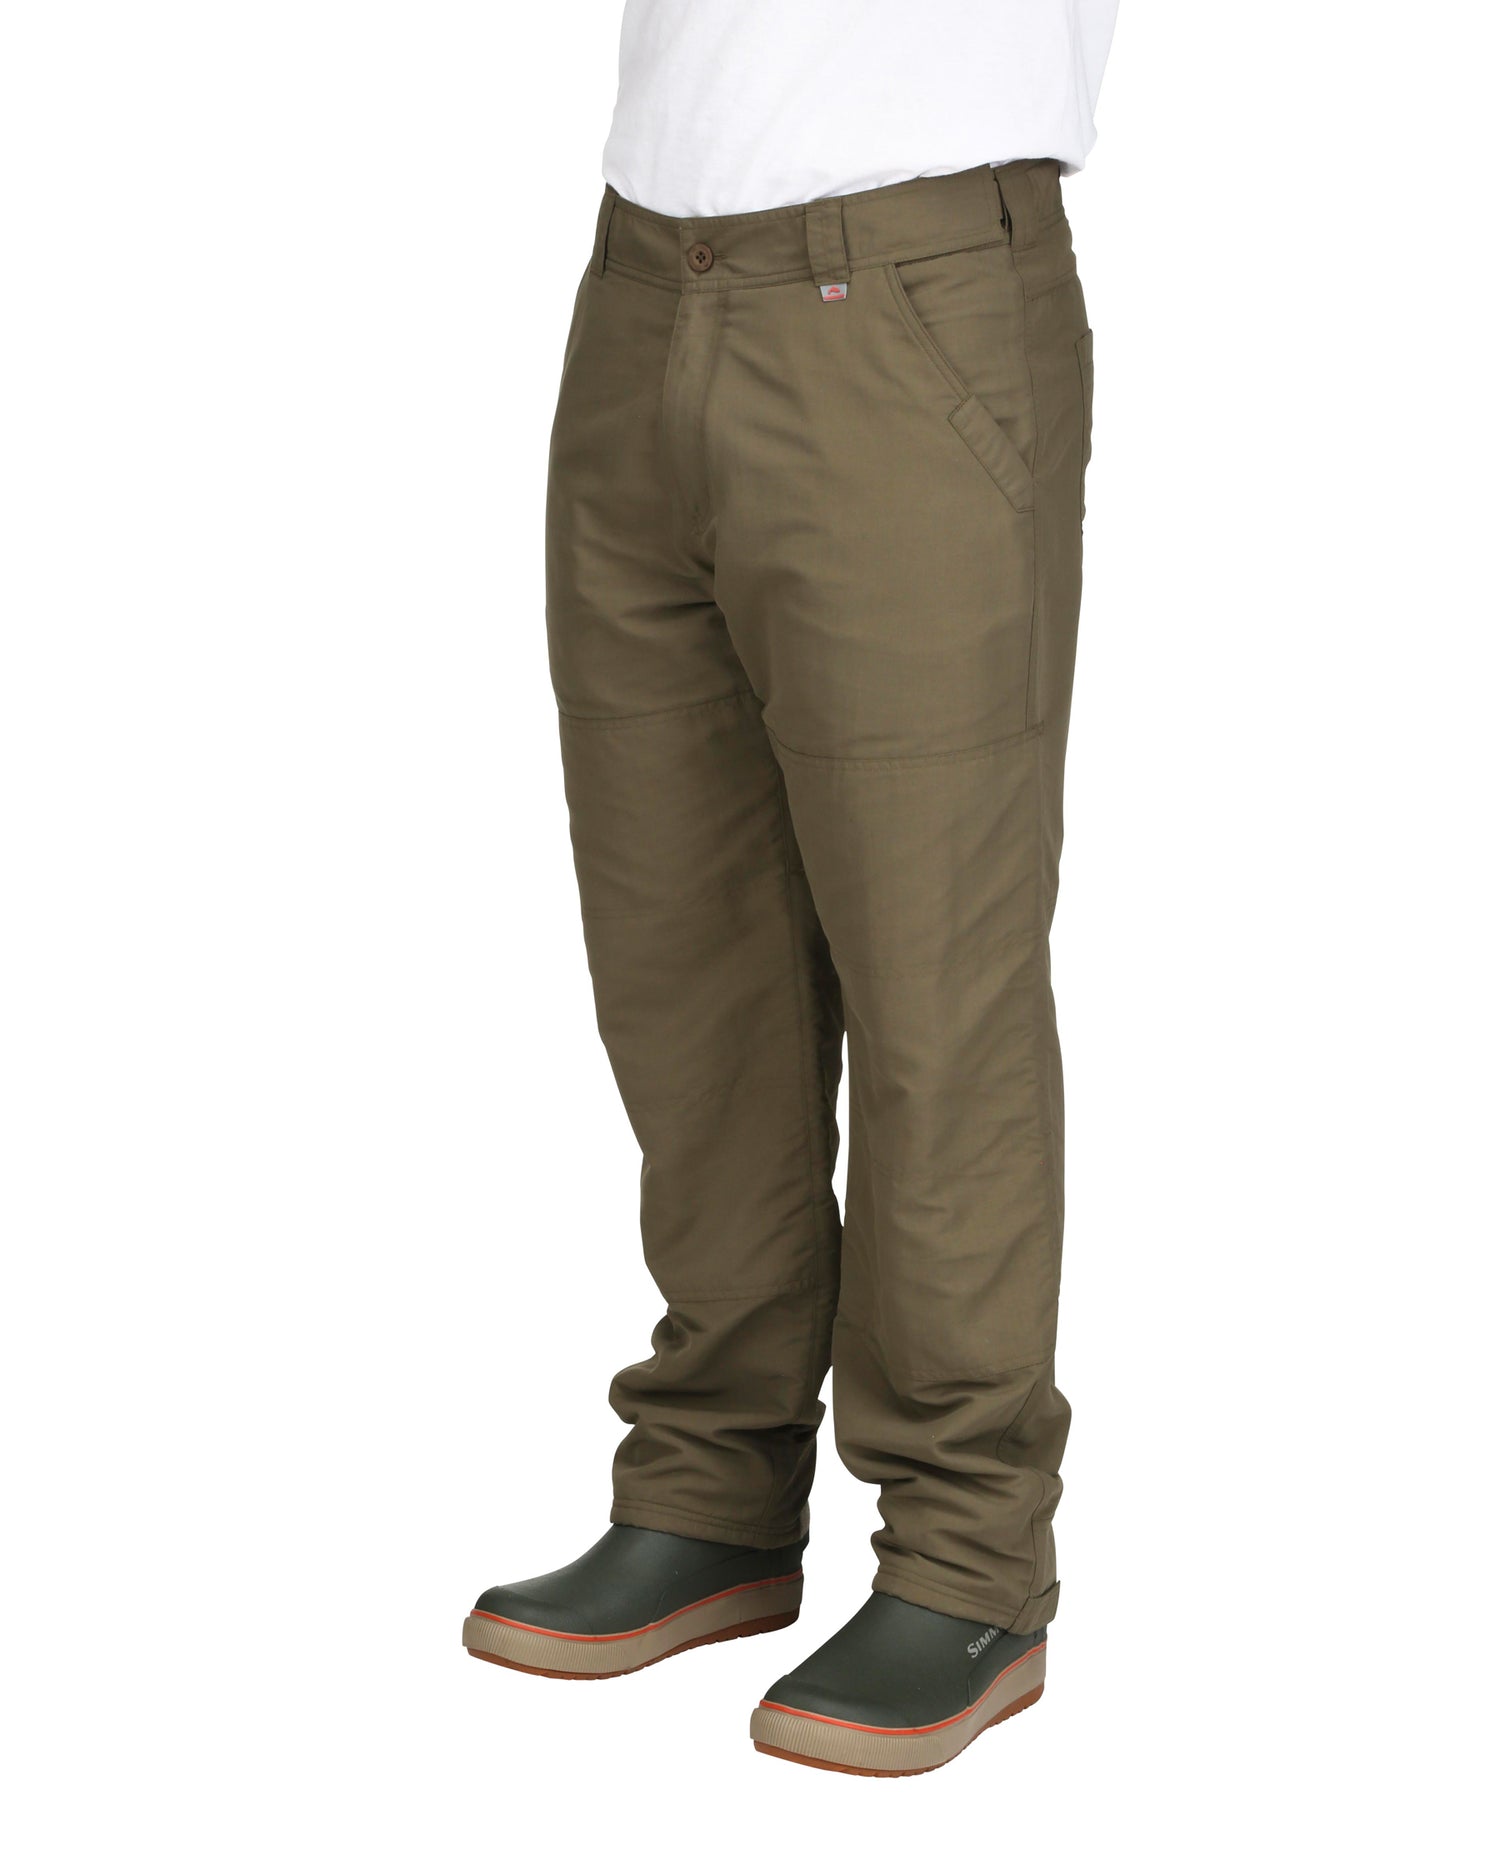 Coldweather_Pant_on-body_frontside